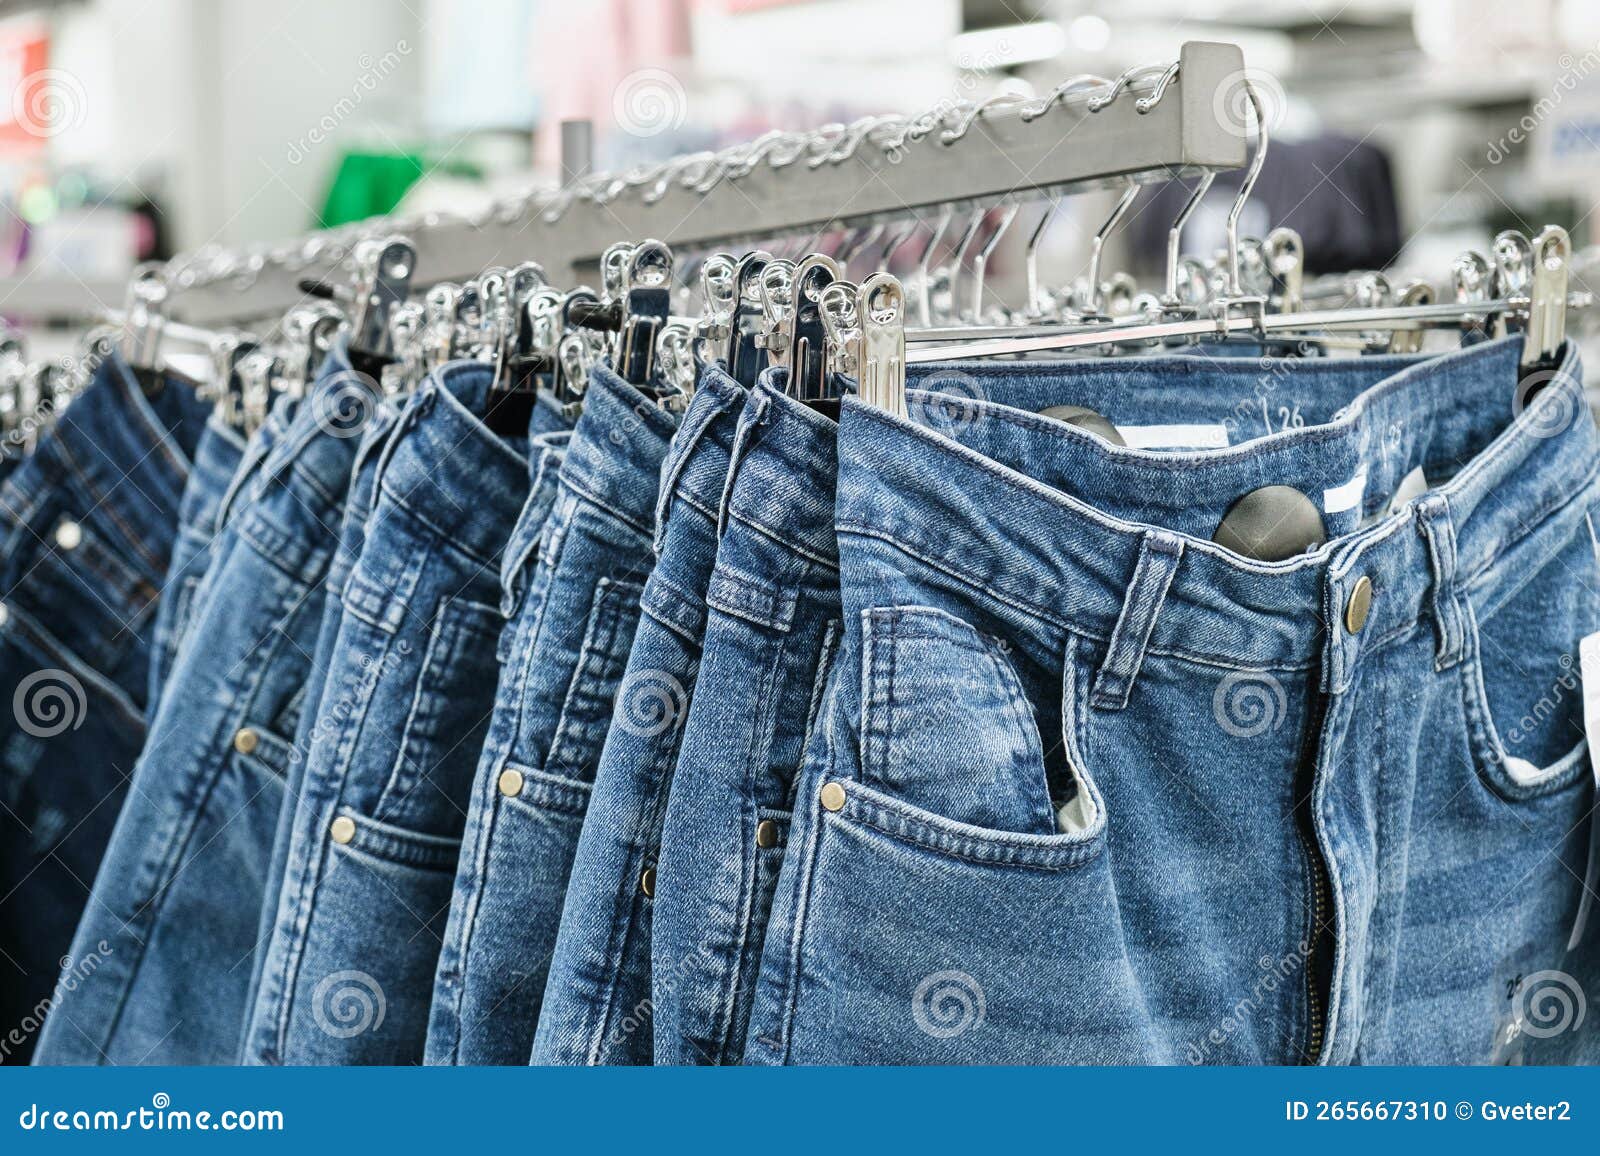 Jeans on Hangers on the Rack of a Retail Clothing Store Stock Photo ...